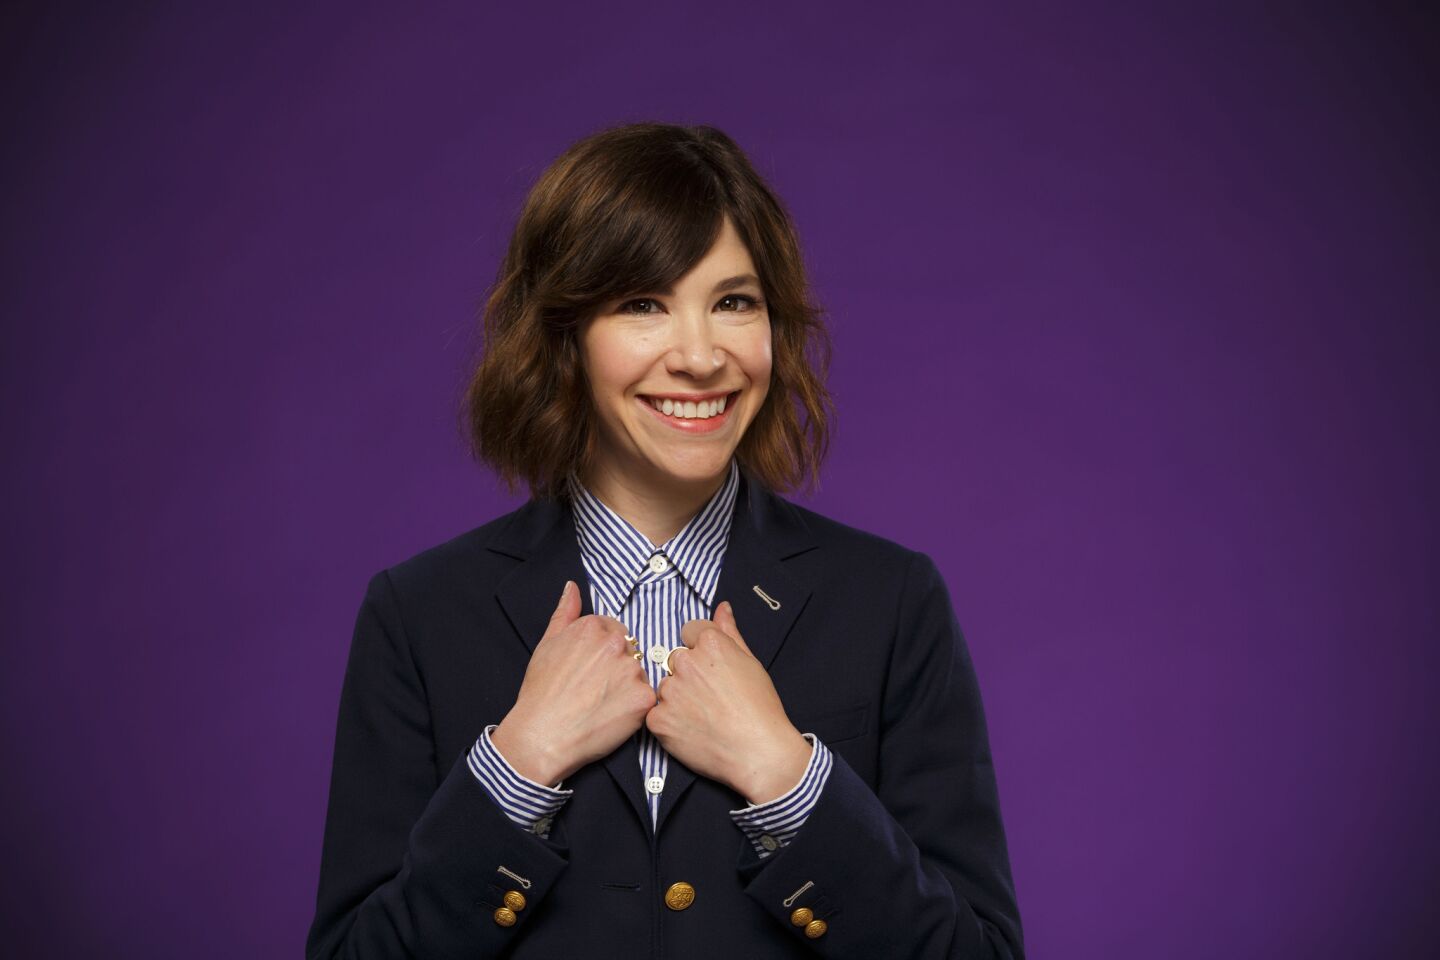 Celebrity portraits by The Times | Carrie Brownstein